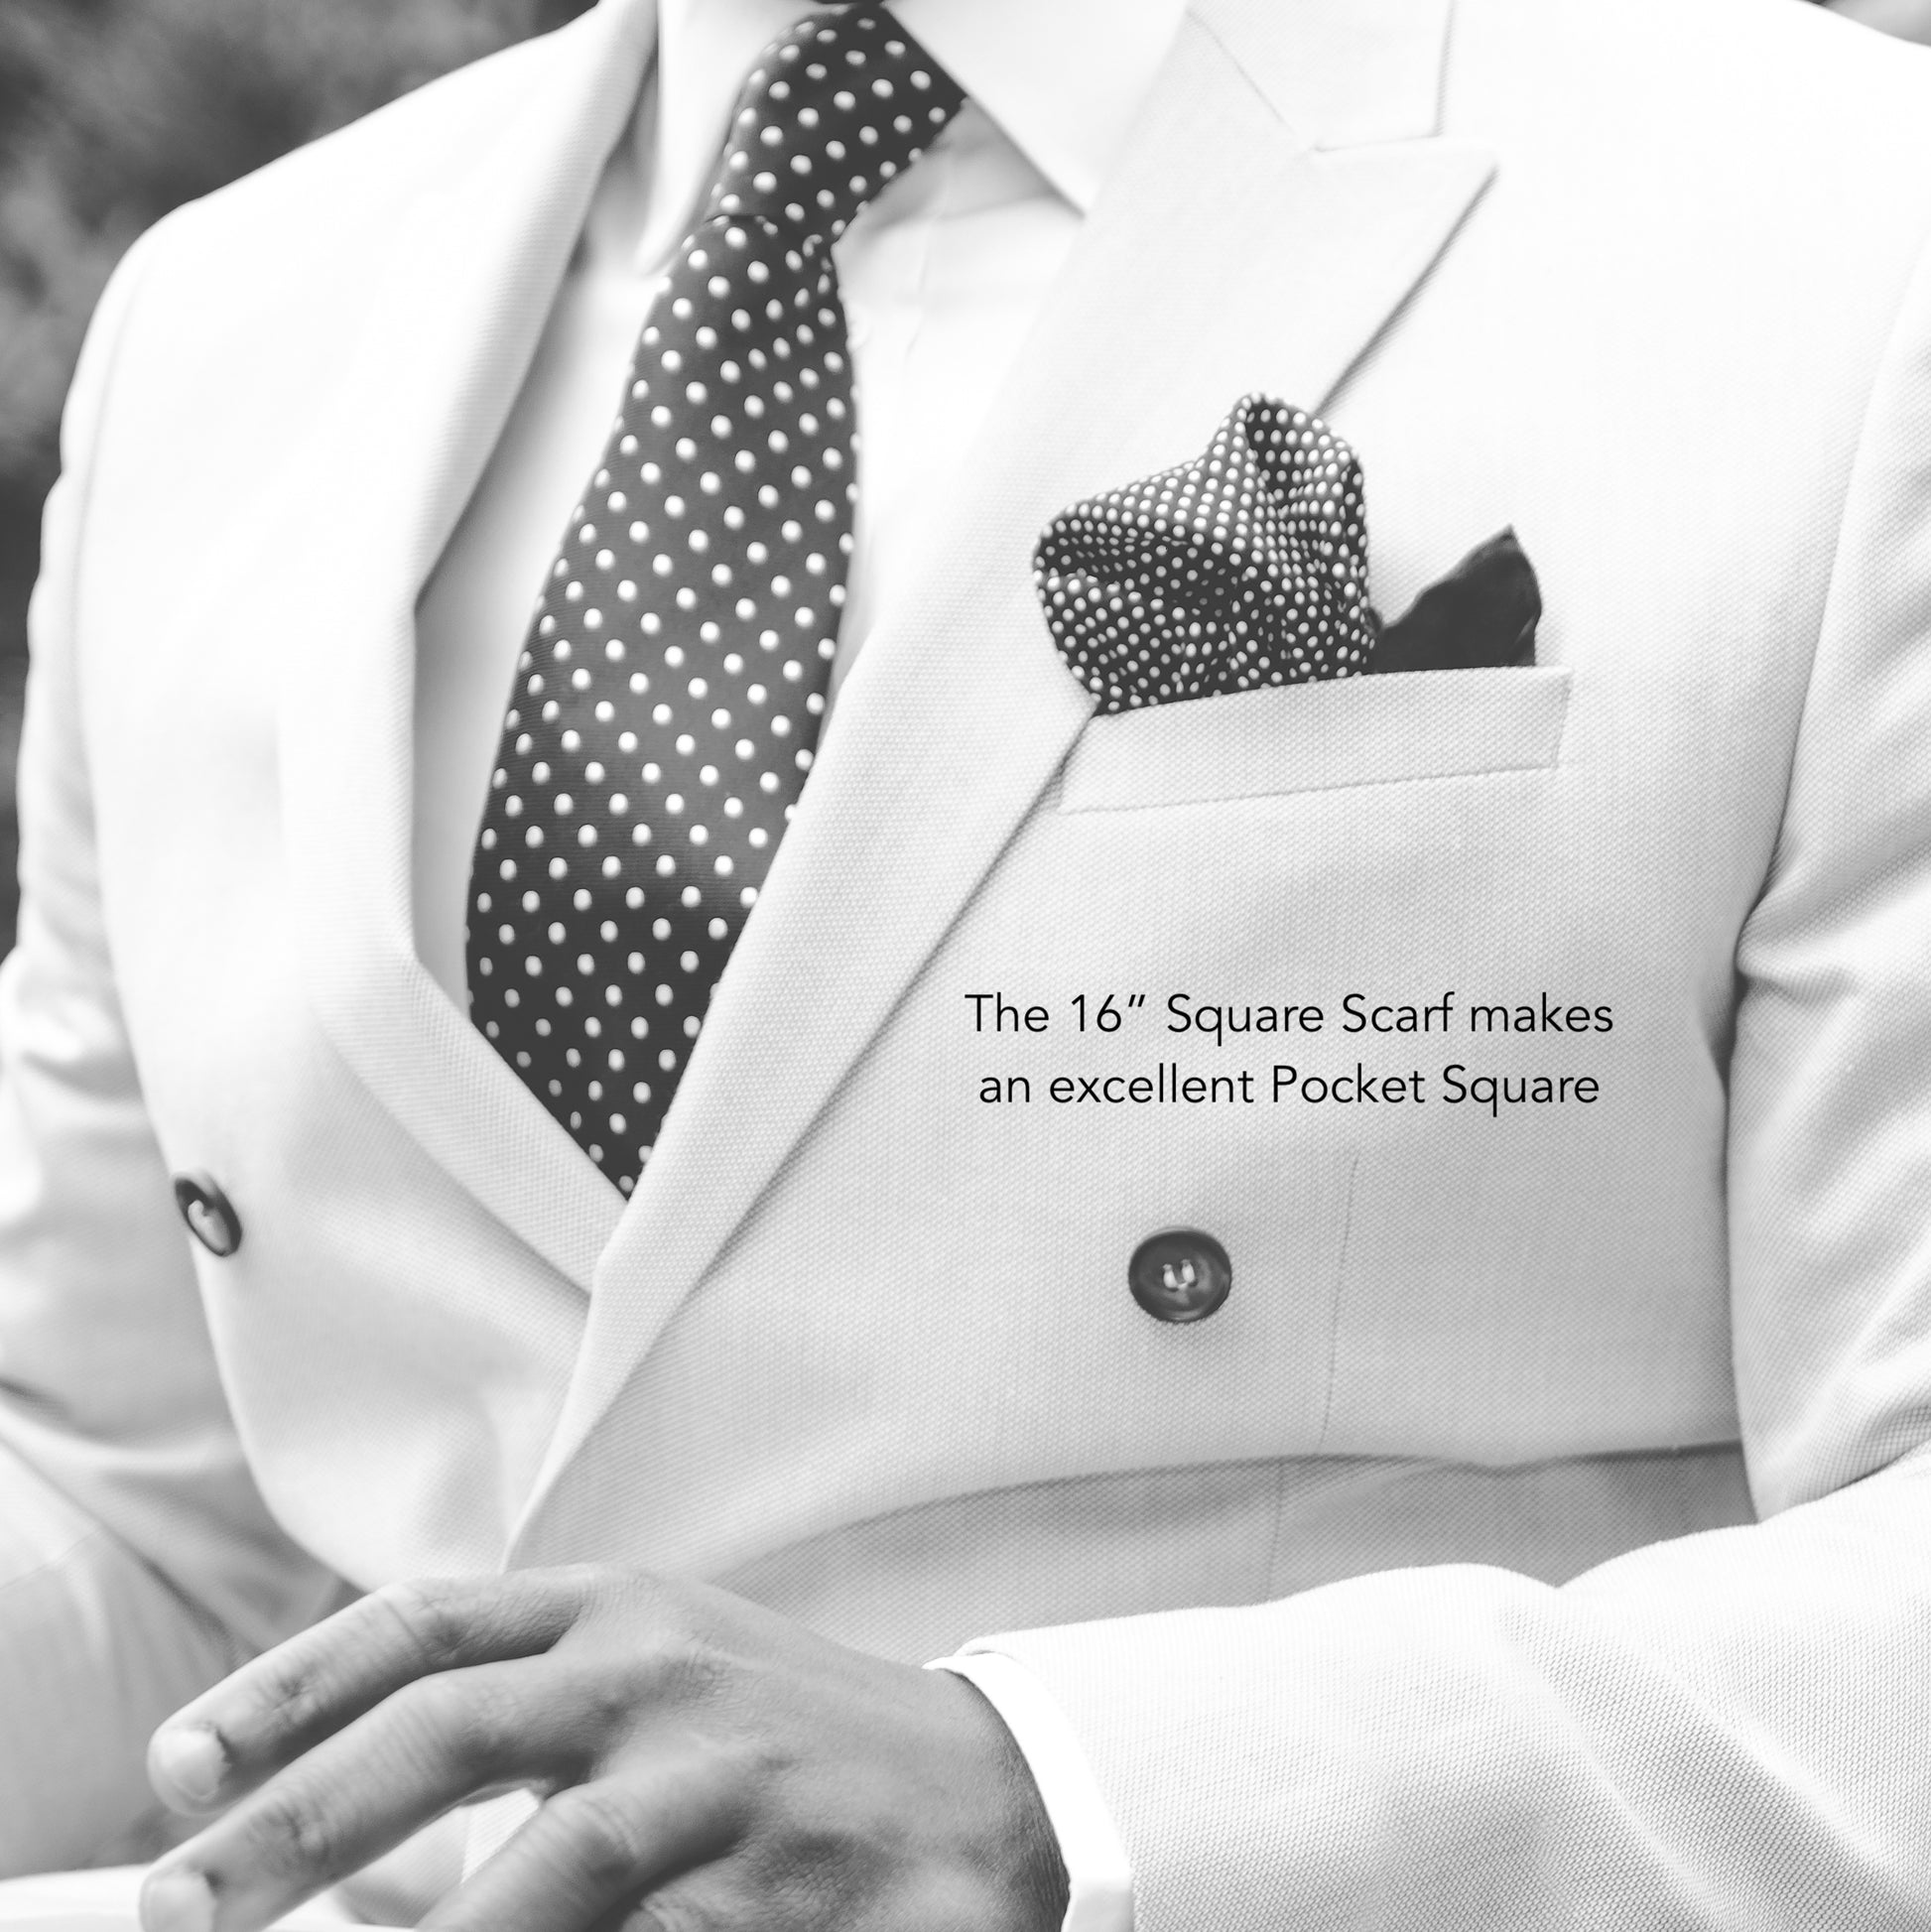 16 inch pocket square can be worn as men's pocket square